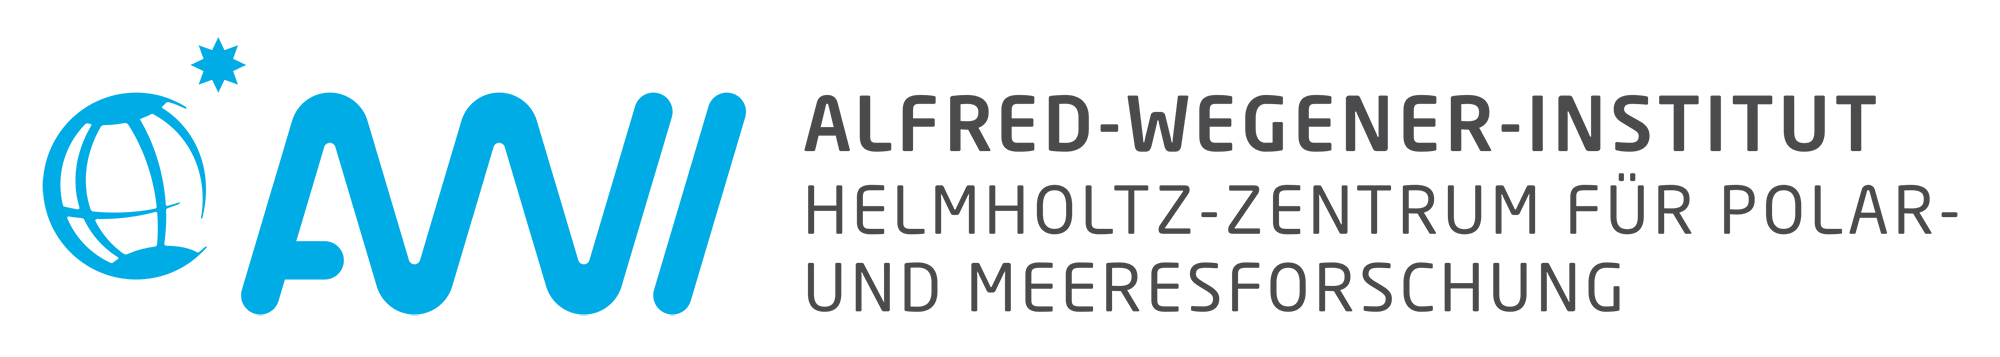 Logo of Alfred Wegener Institute Helmholtz Centre for Polar and Marine Research (AWI)